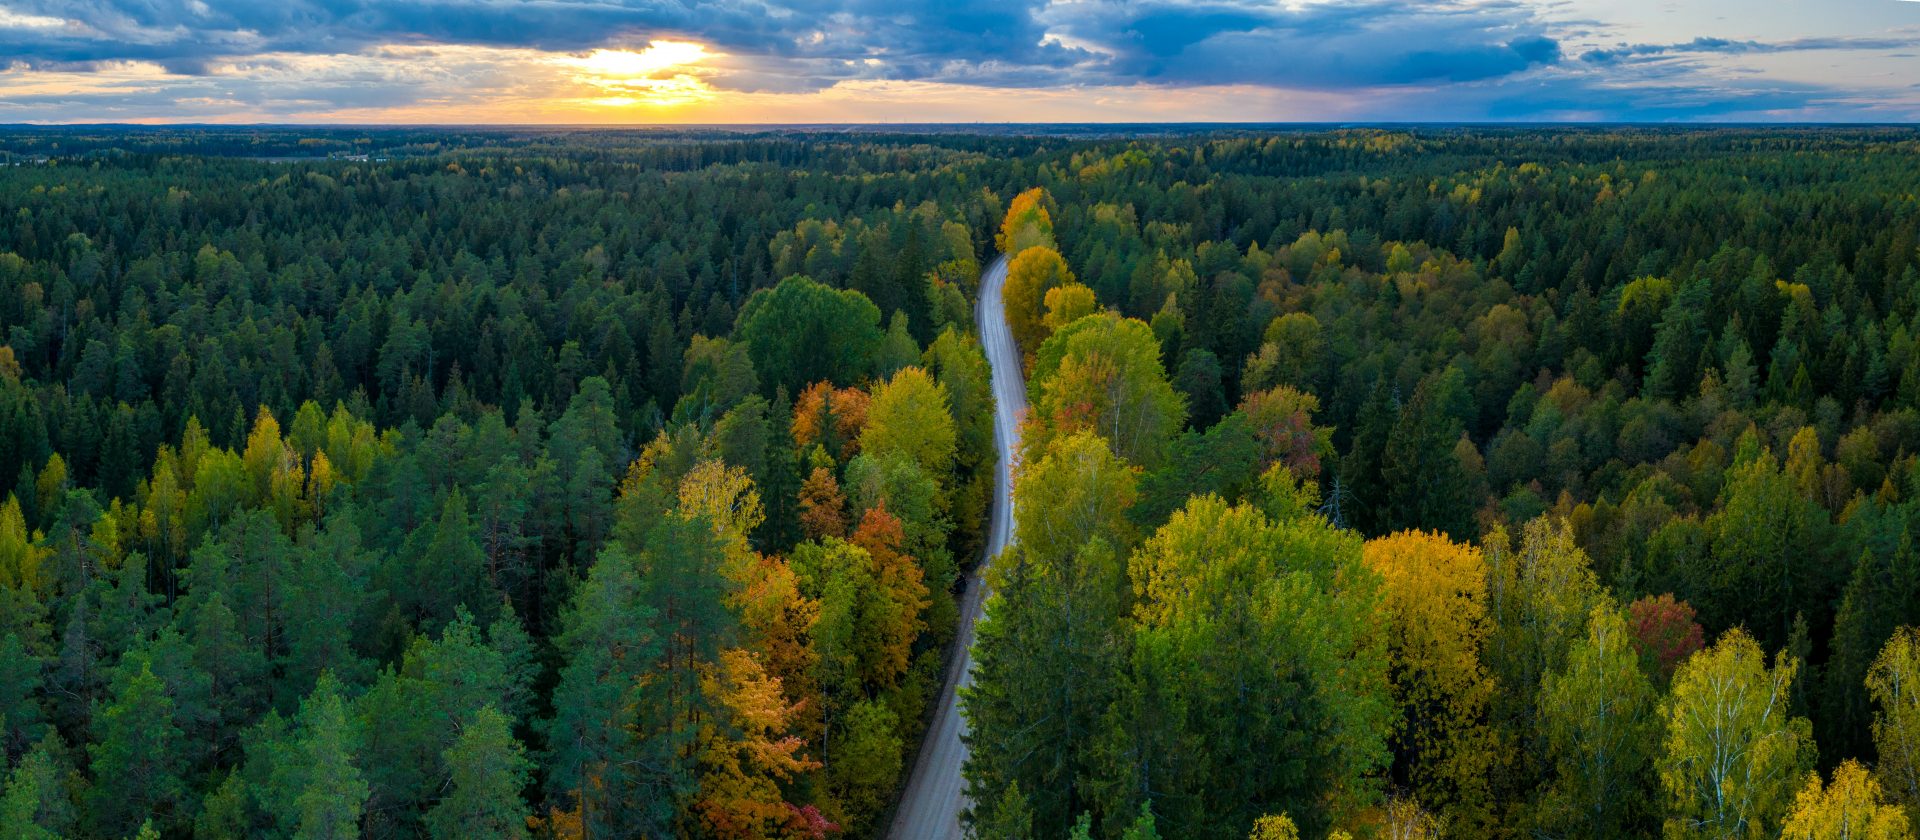 Panorama view of Latvian forest and road from above